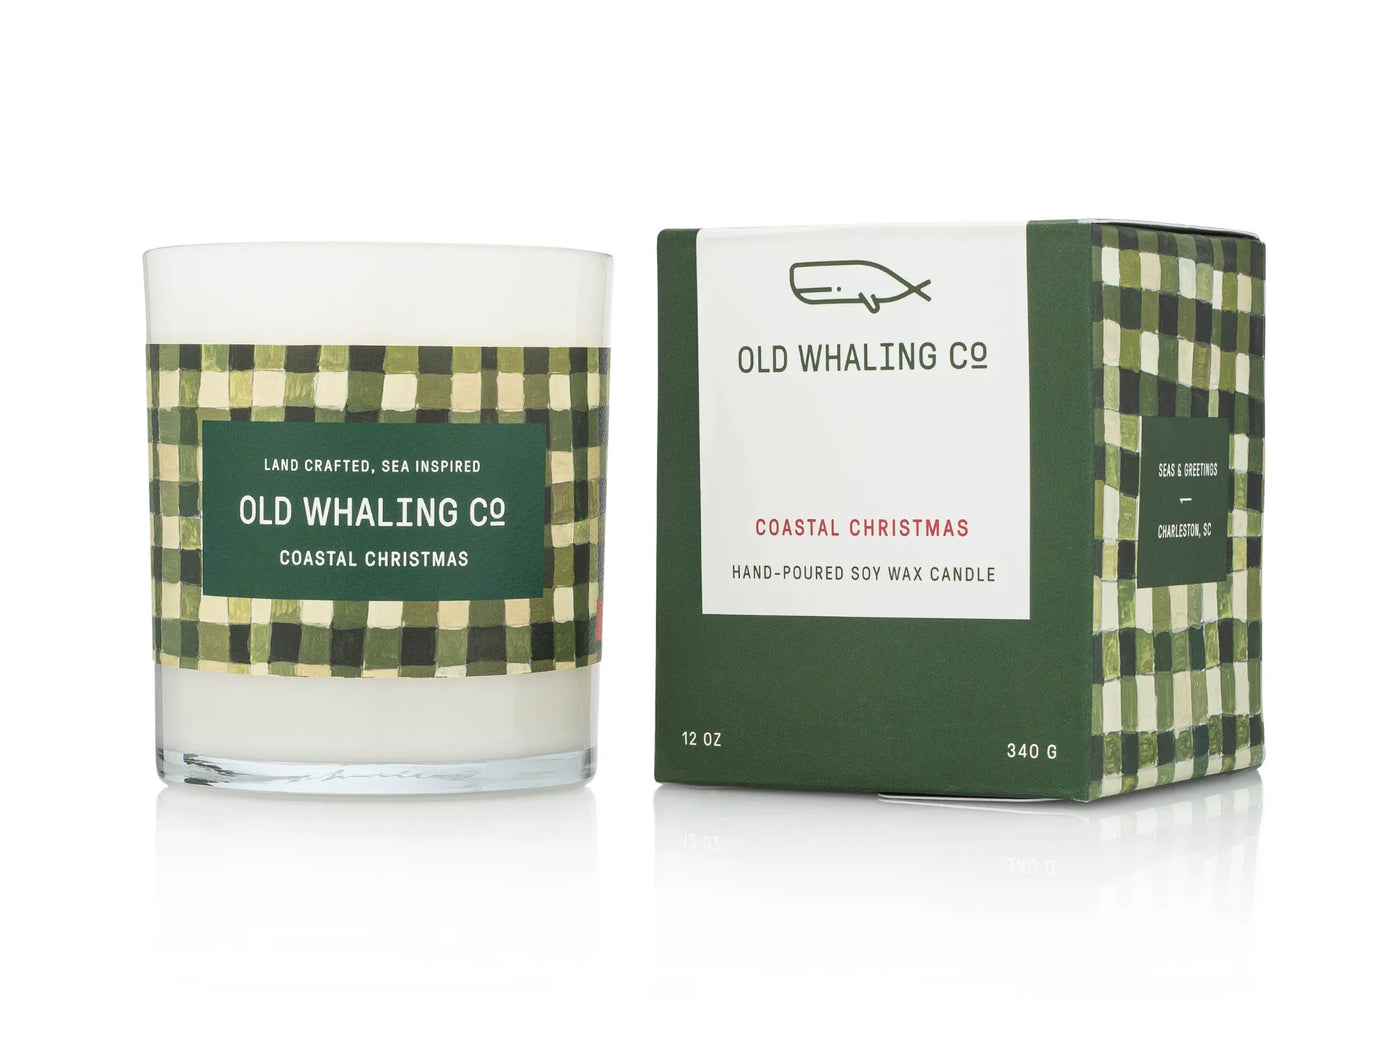 Old Whaling Co. Coastal Christmas Candle